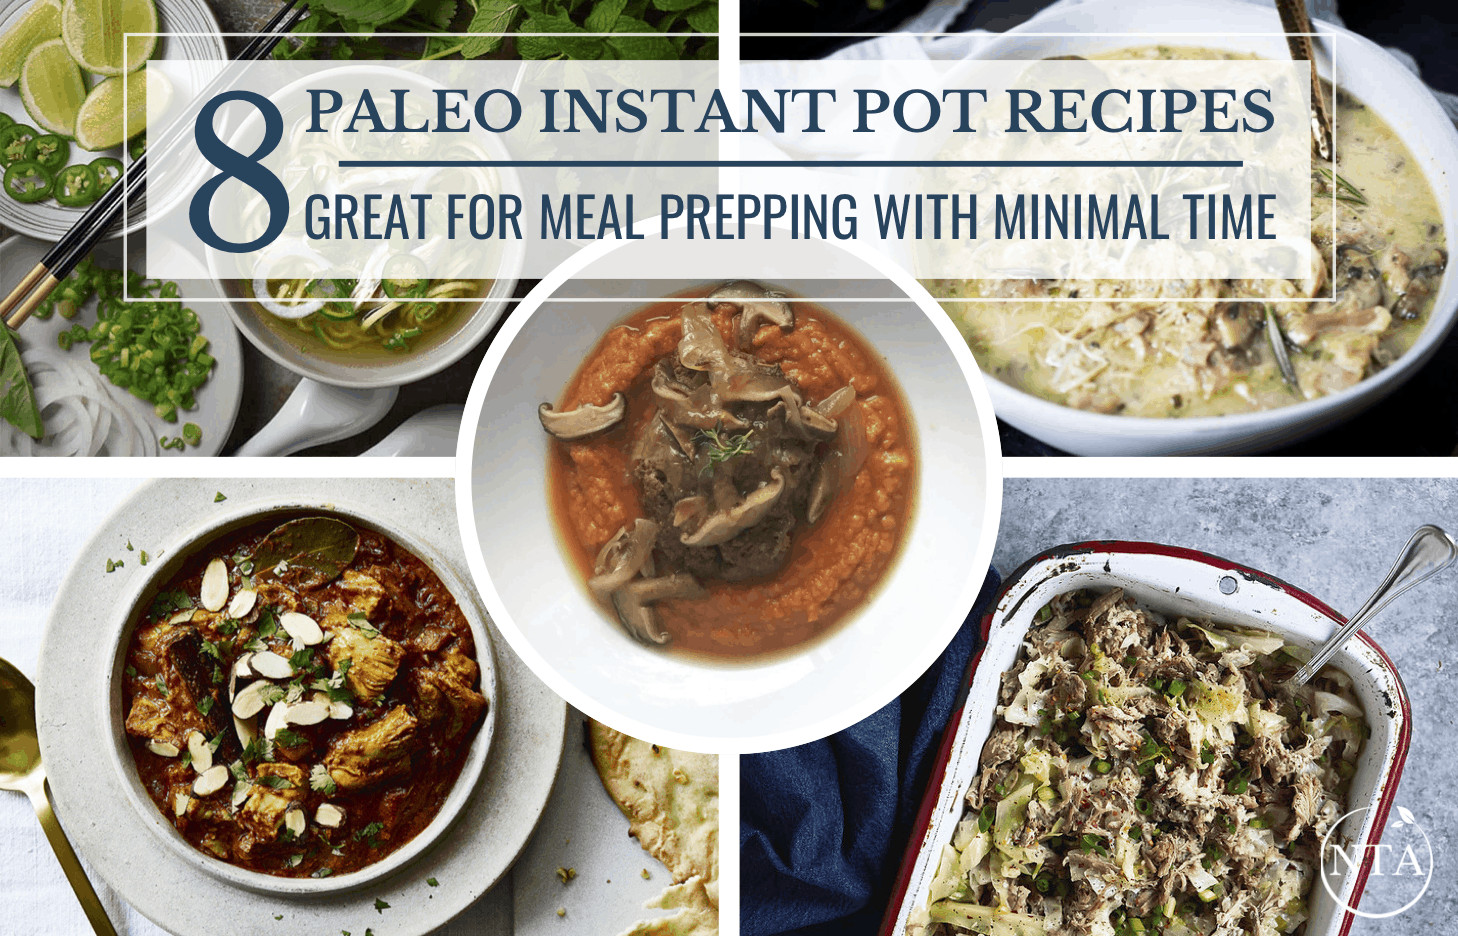 Paleo Instant Pot Recipes
 8 Paleo Instant Pot Recipes Meal Prepping with Minimal